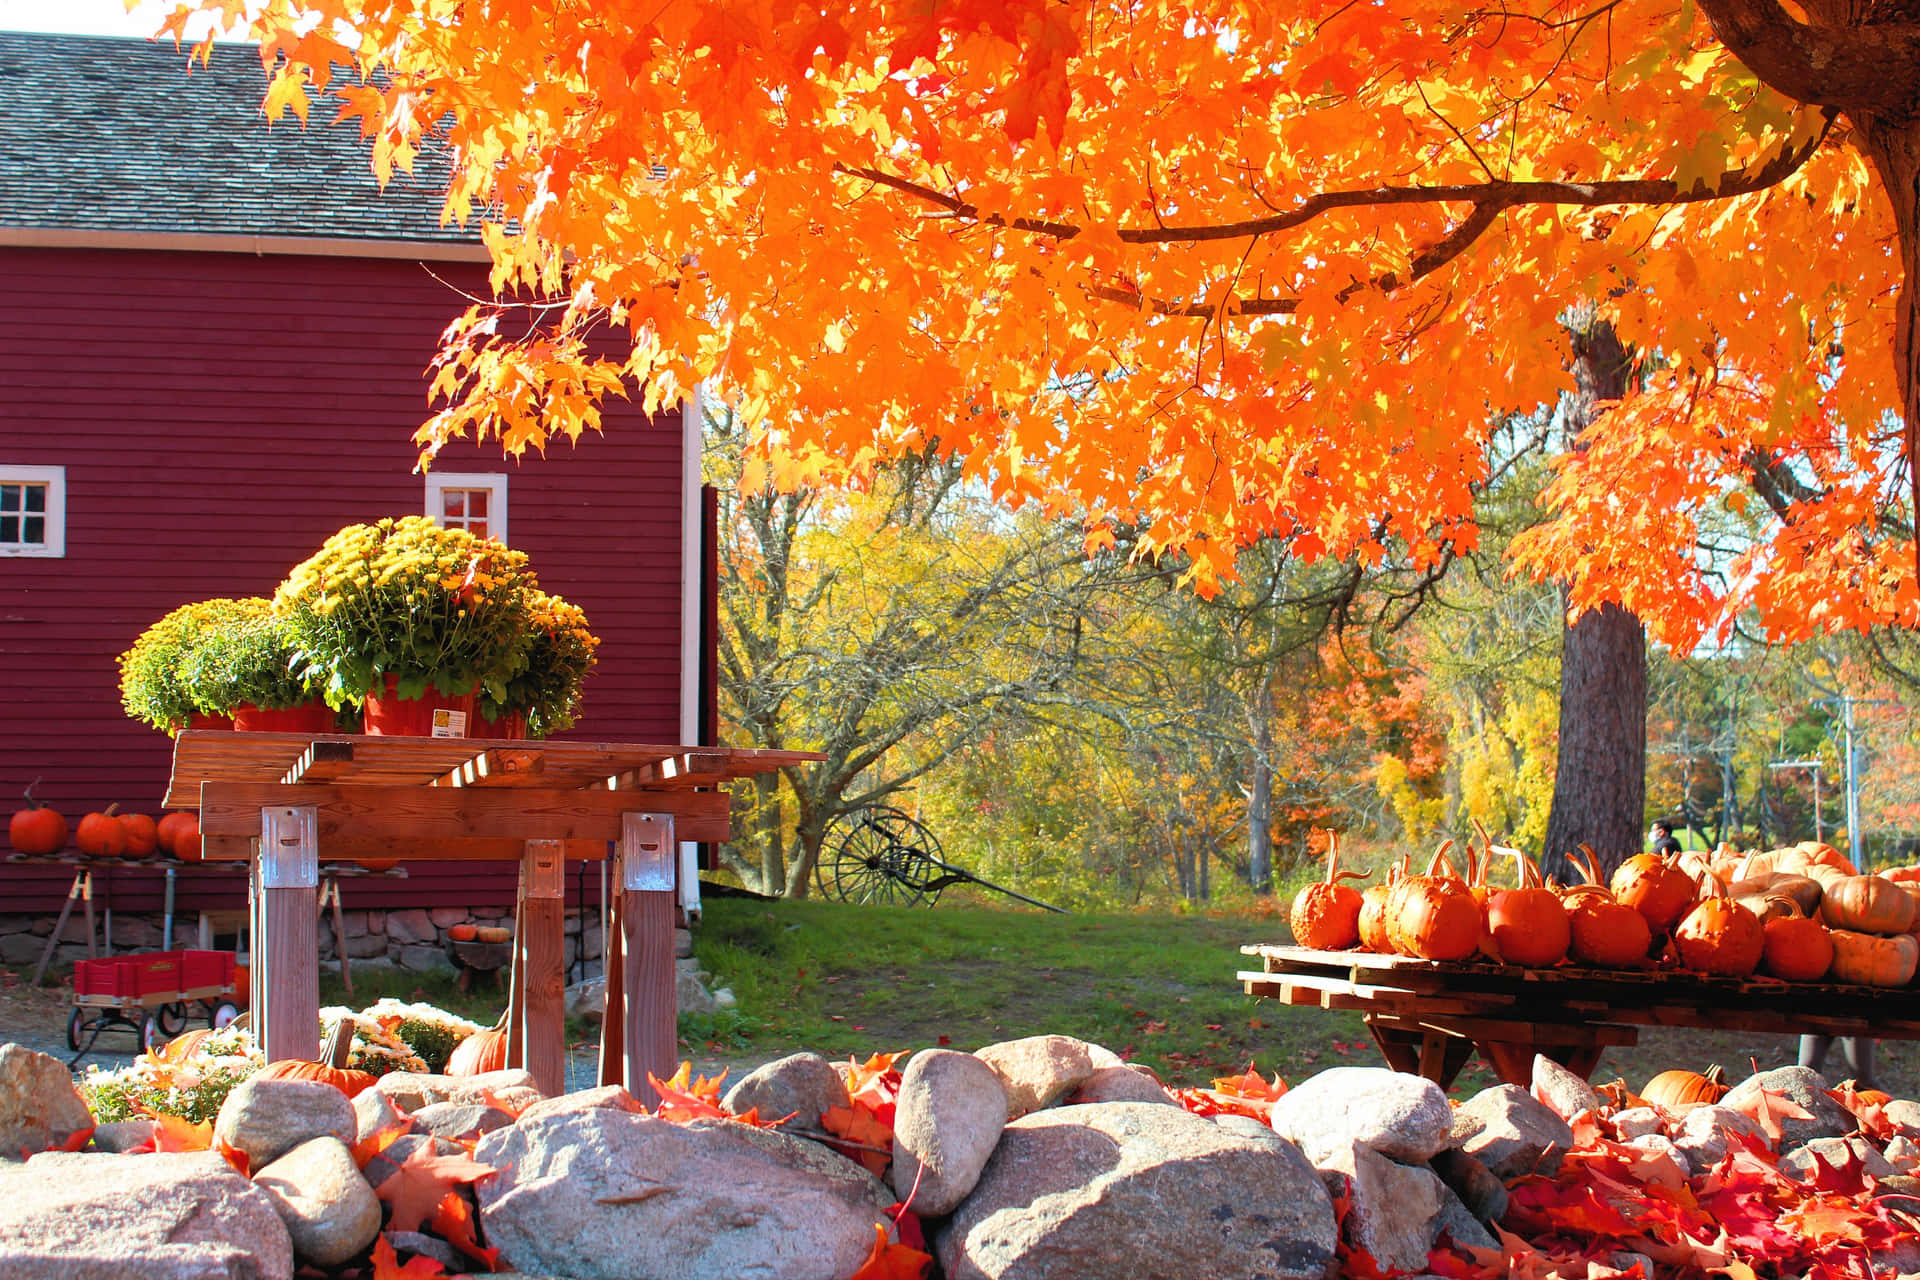 Enjoy the vivid colors of an autumn day in New England. Wallpaper